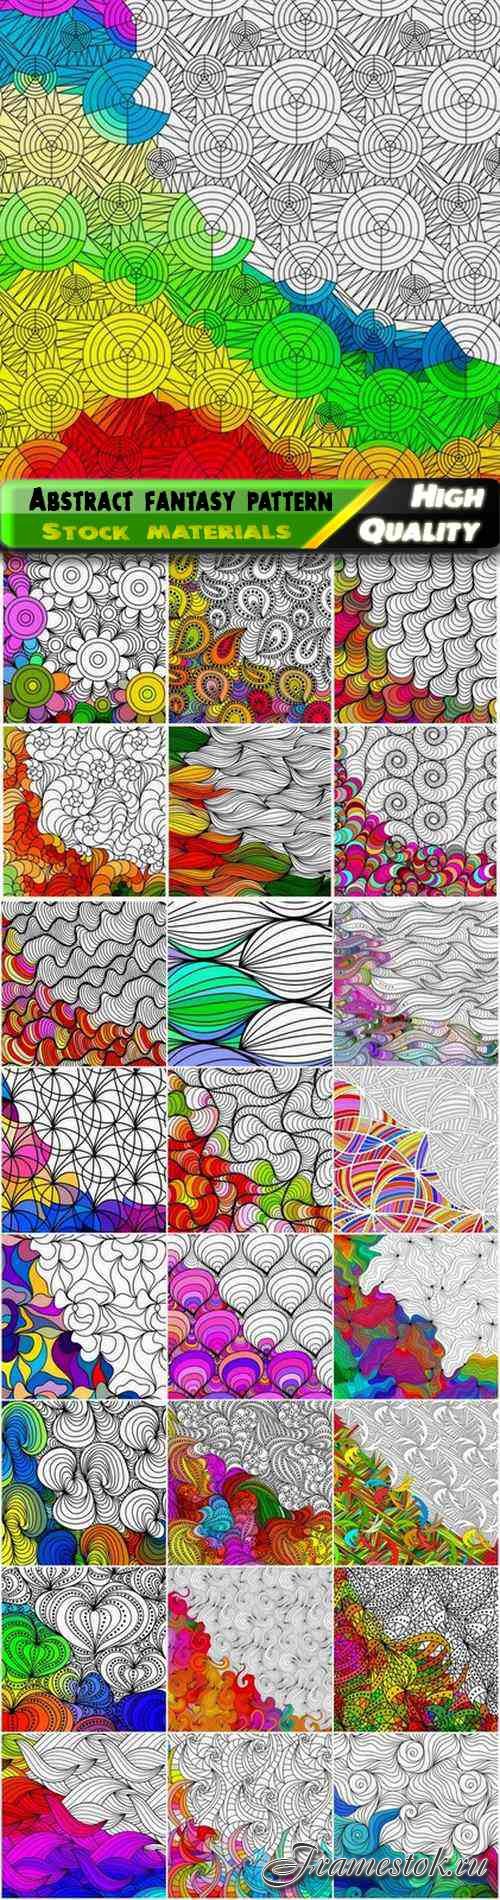 Abstract fantasy pattern and ornament for coloring book - 25 Eps